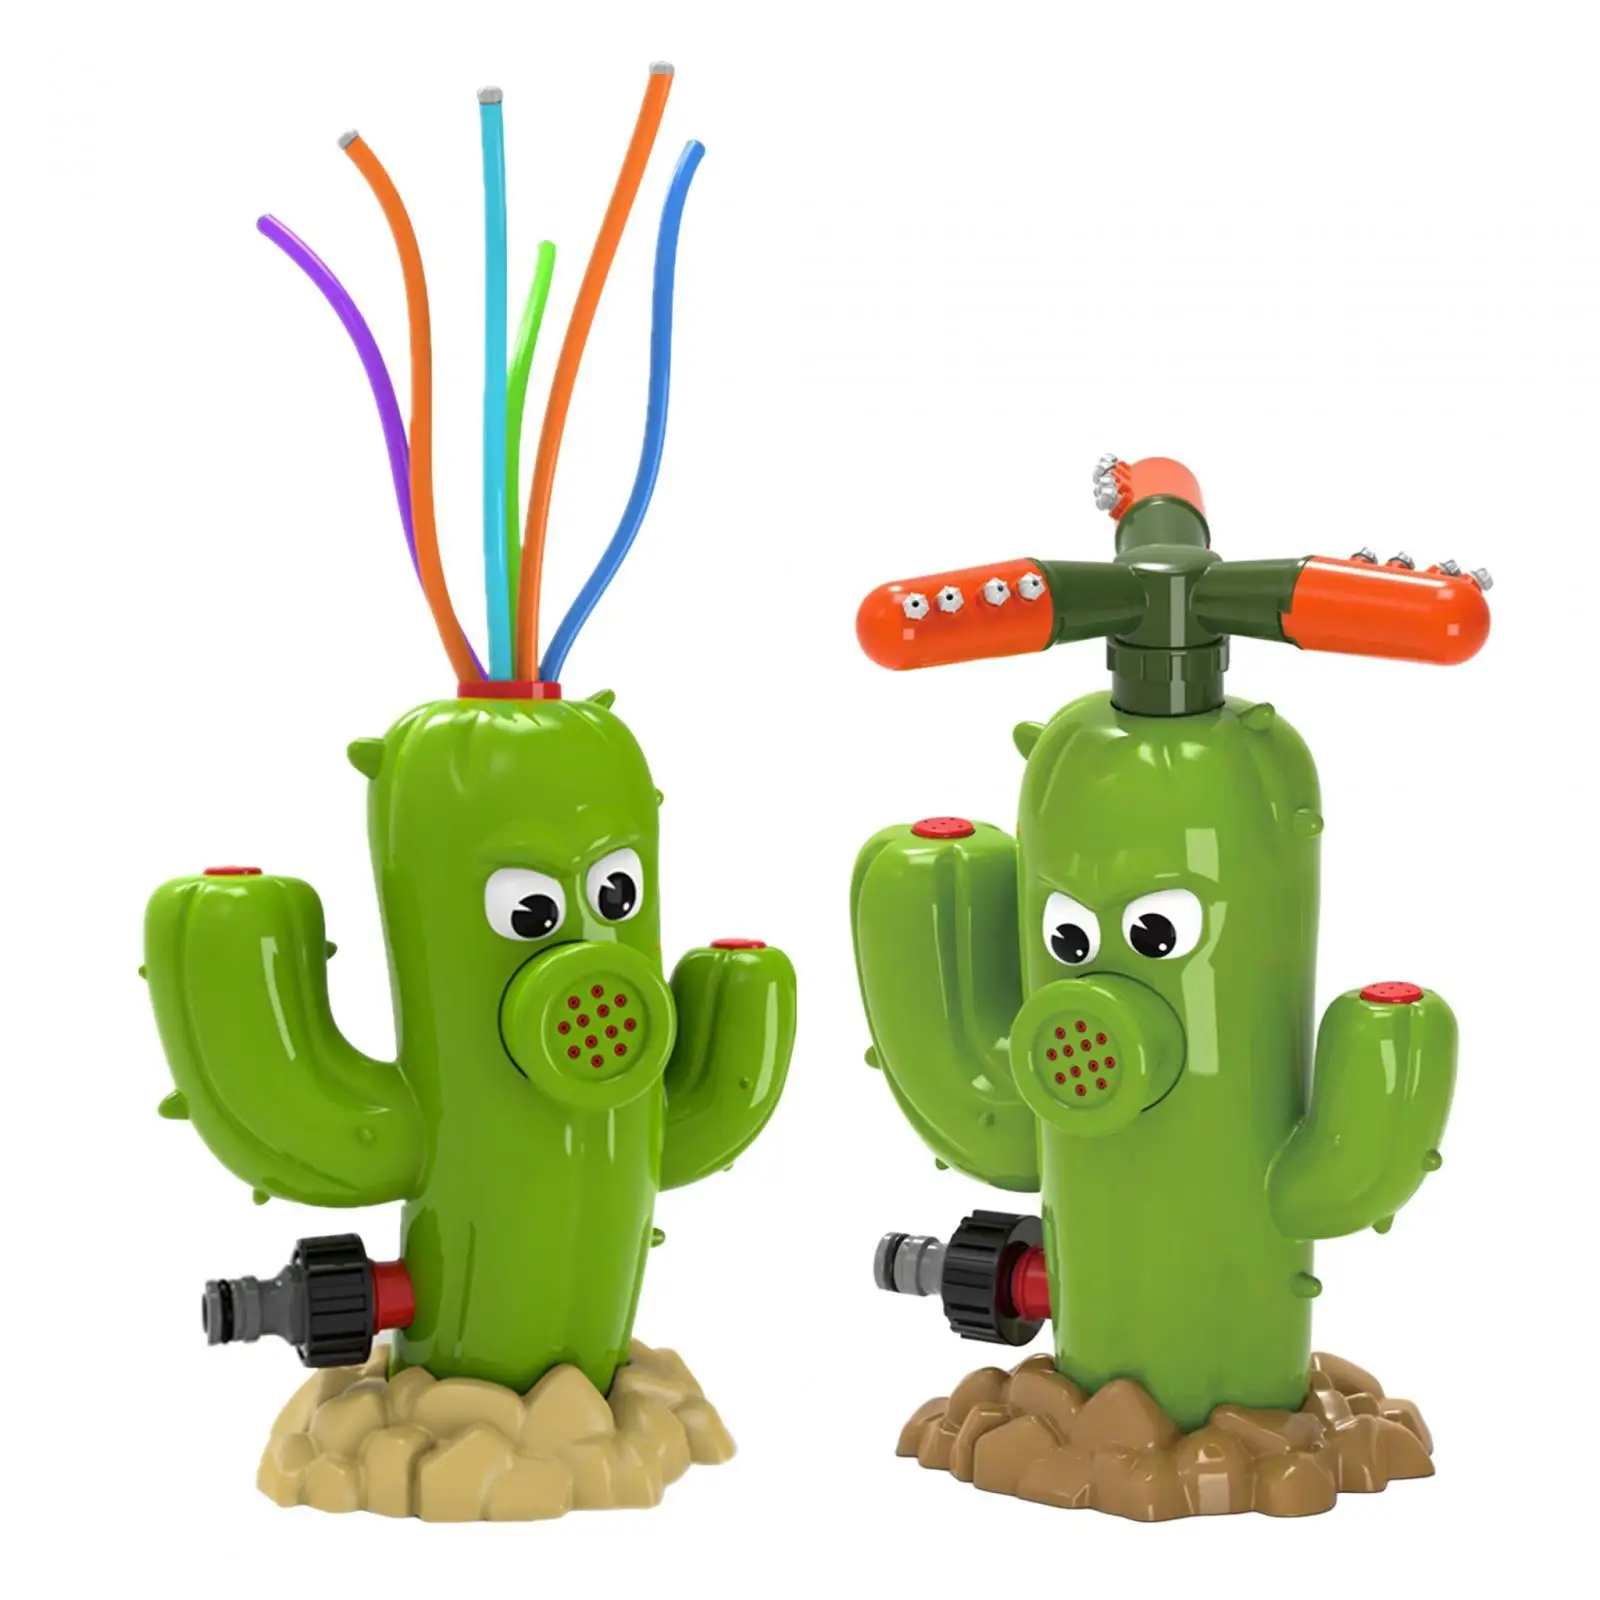 Cactus Sprinklers Outdoor Toy Splashing Fun Interaction Water Sprayer Summer Backyard Toy for Holiday Patio Beach Party Yard